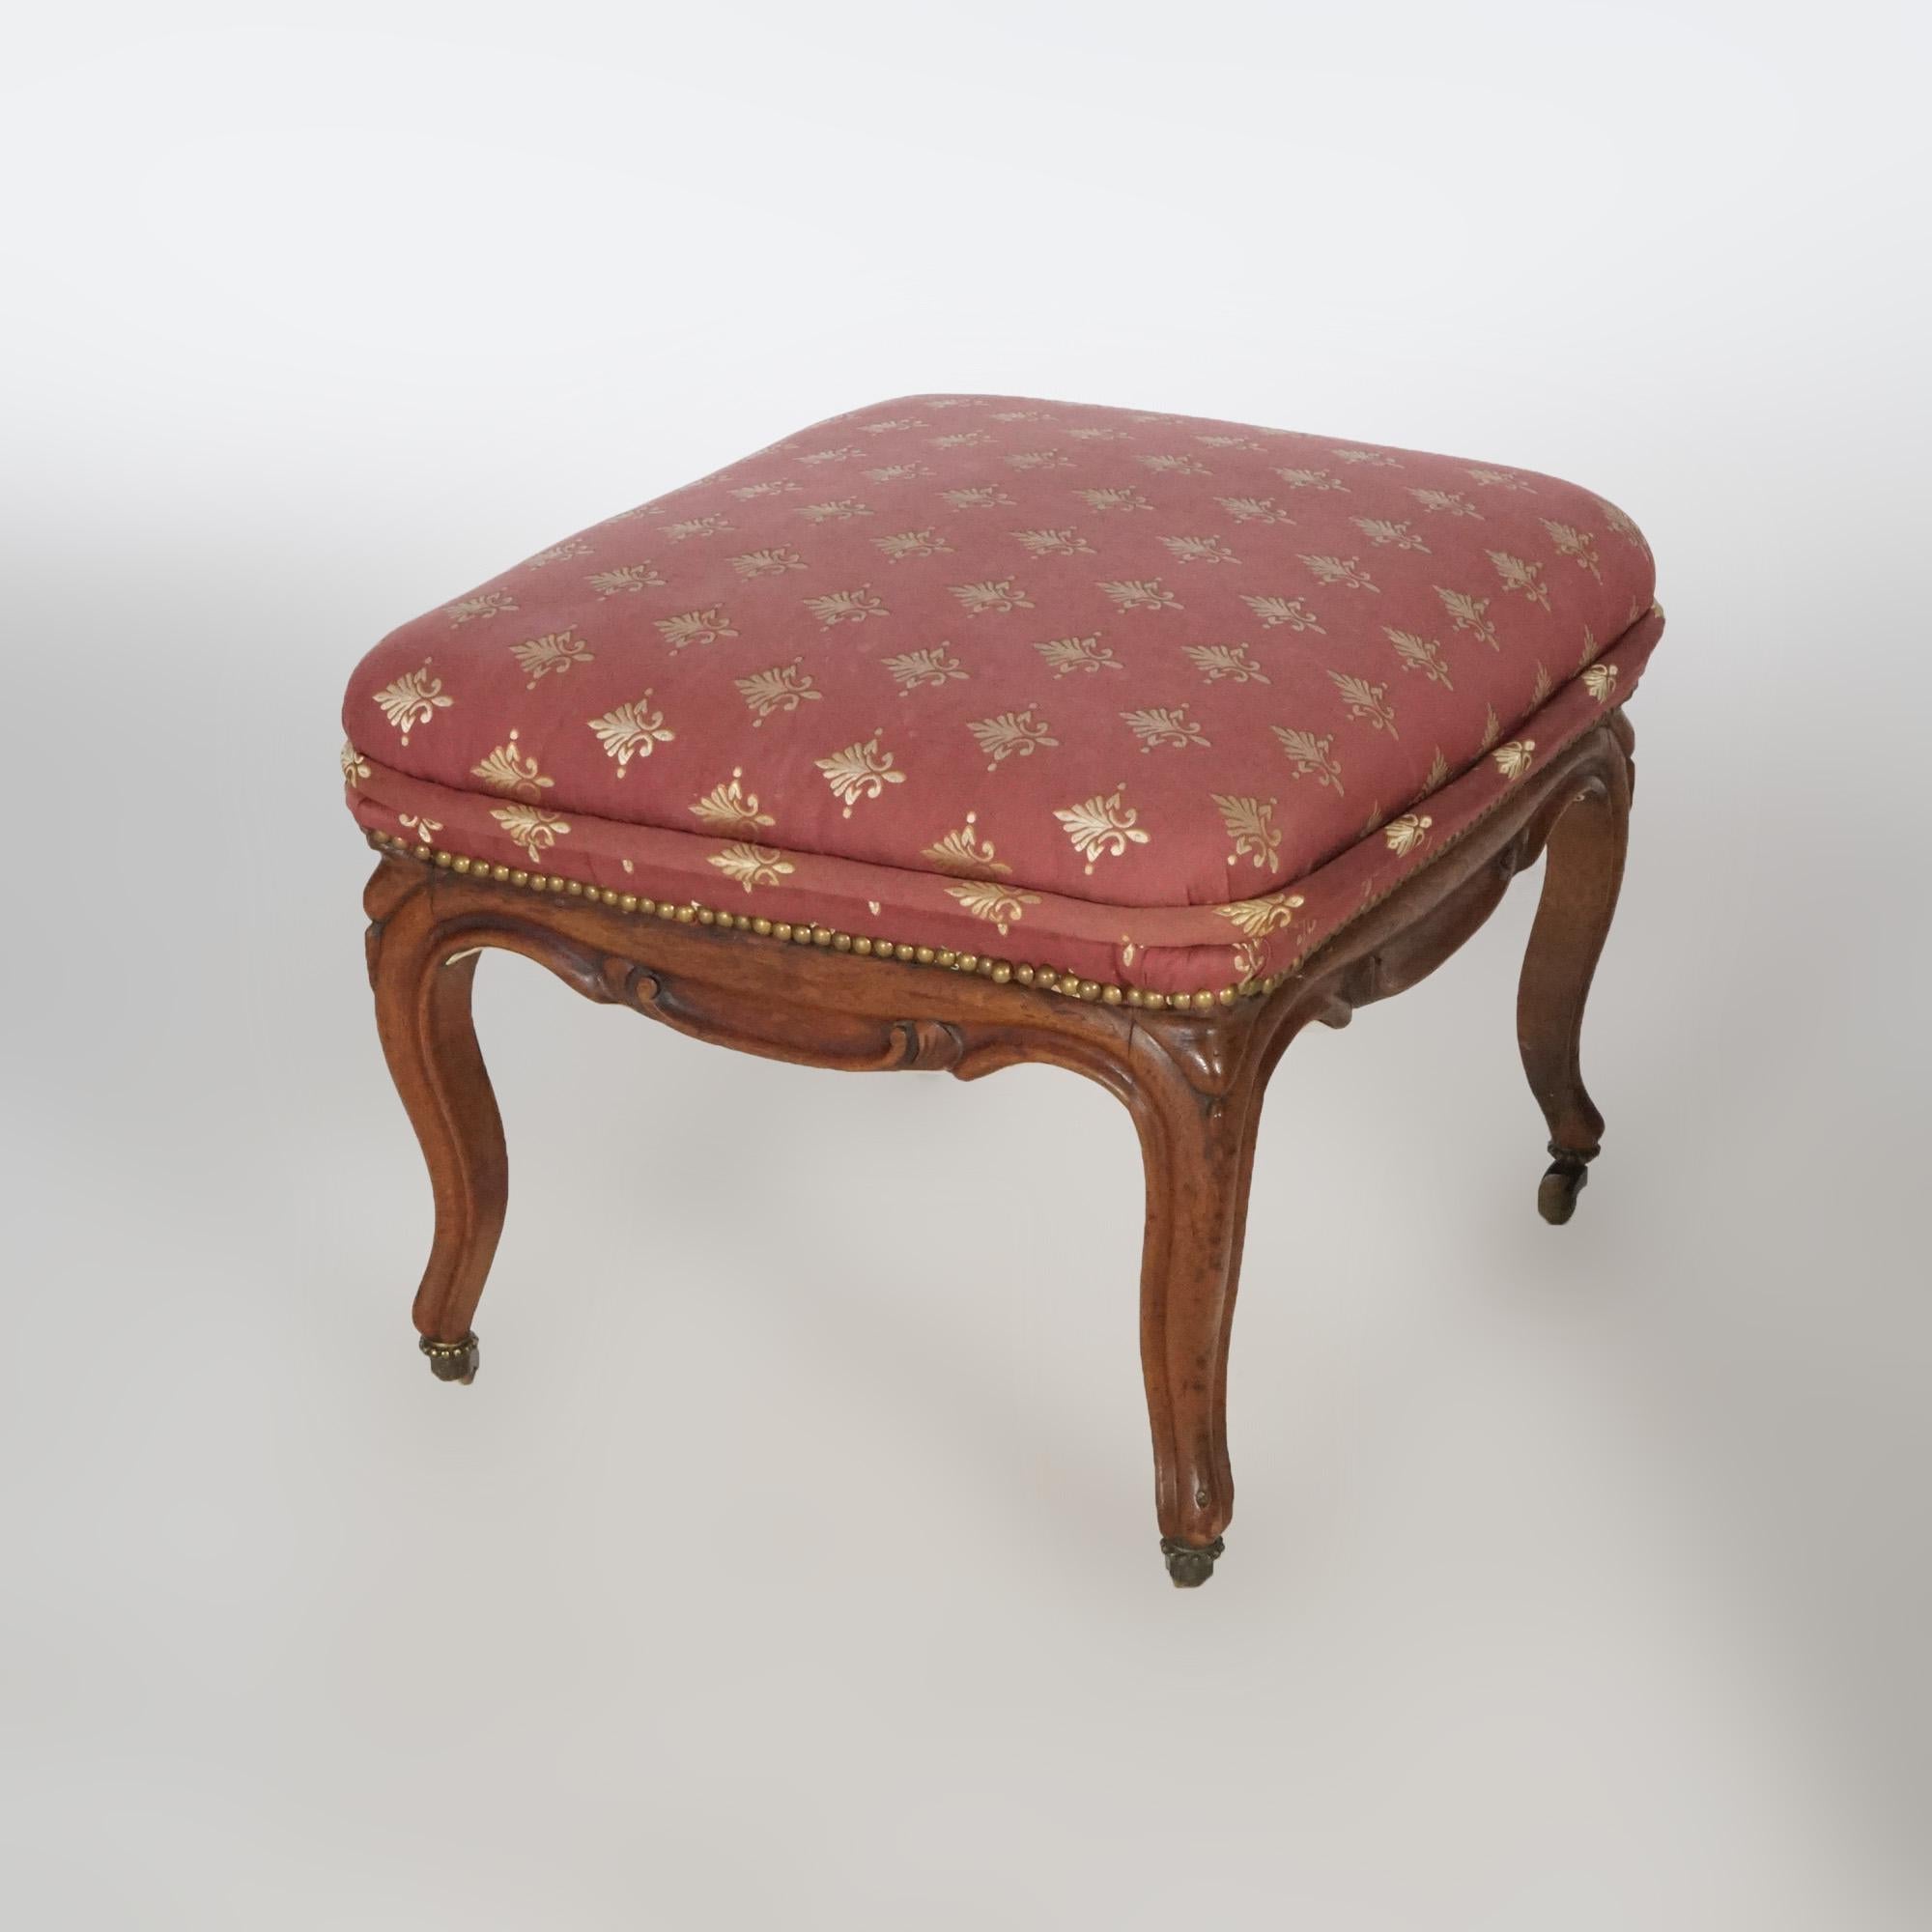 Antique French Style Carved Walnut & Upholstered Foot Stool, circa 1920 For Sale 2